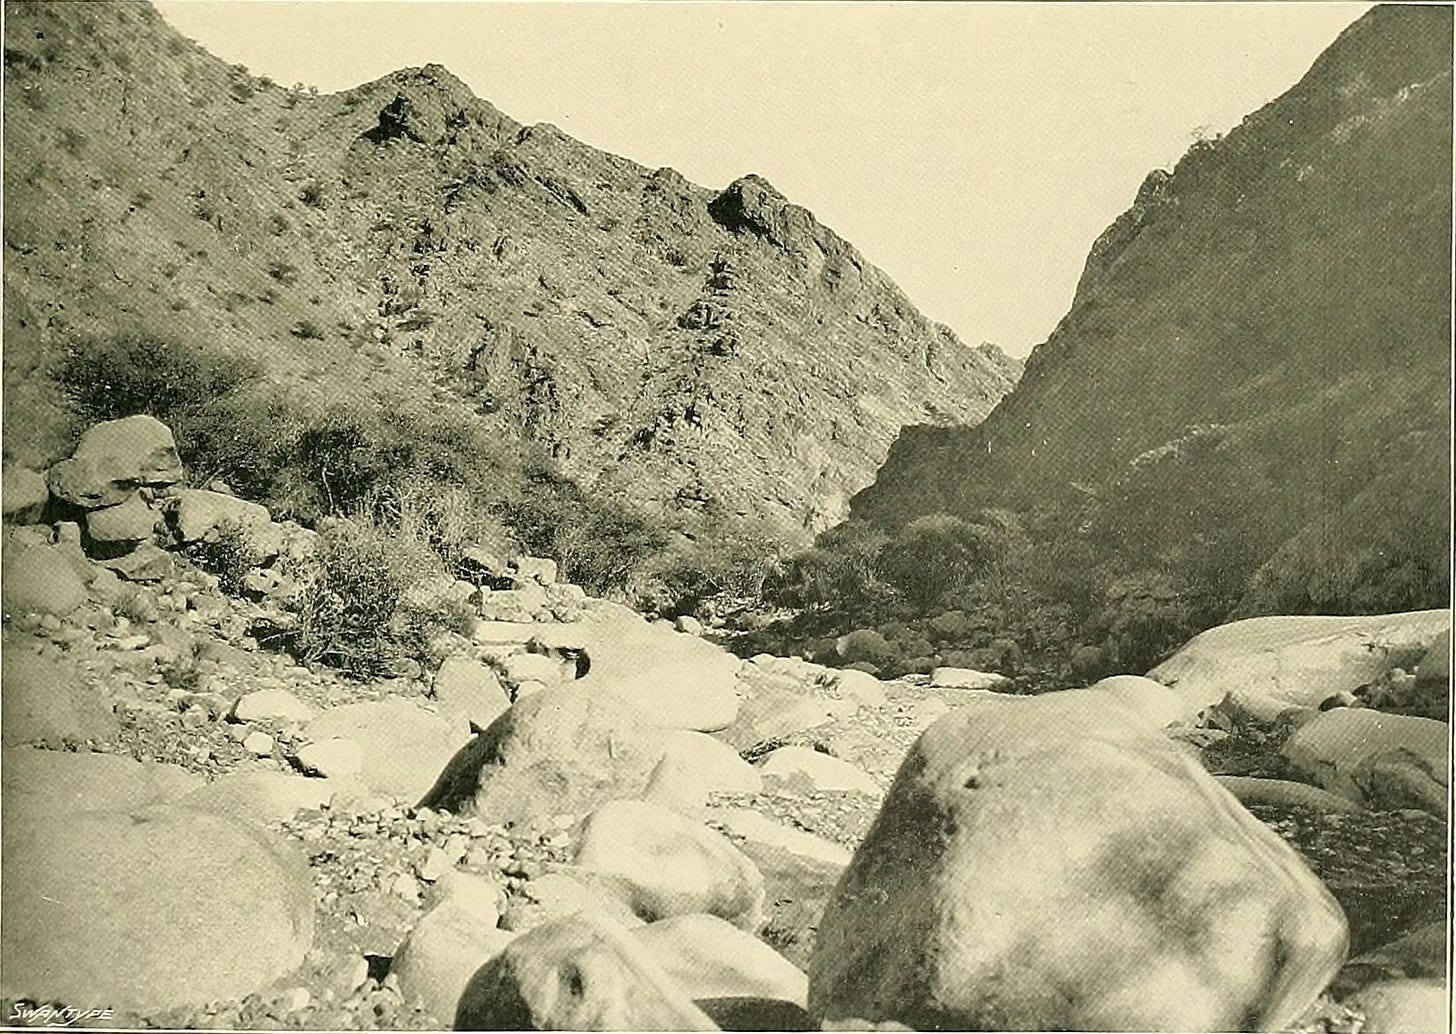 Black and white photo of an Egyptian desert wadi, or run with stones and brush